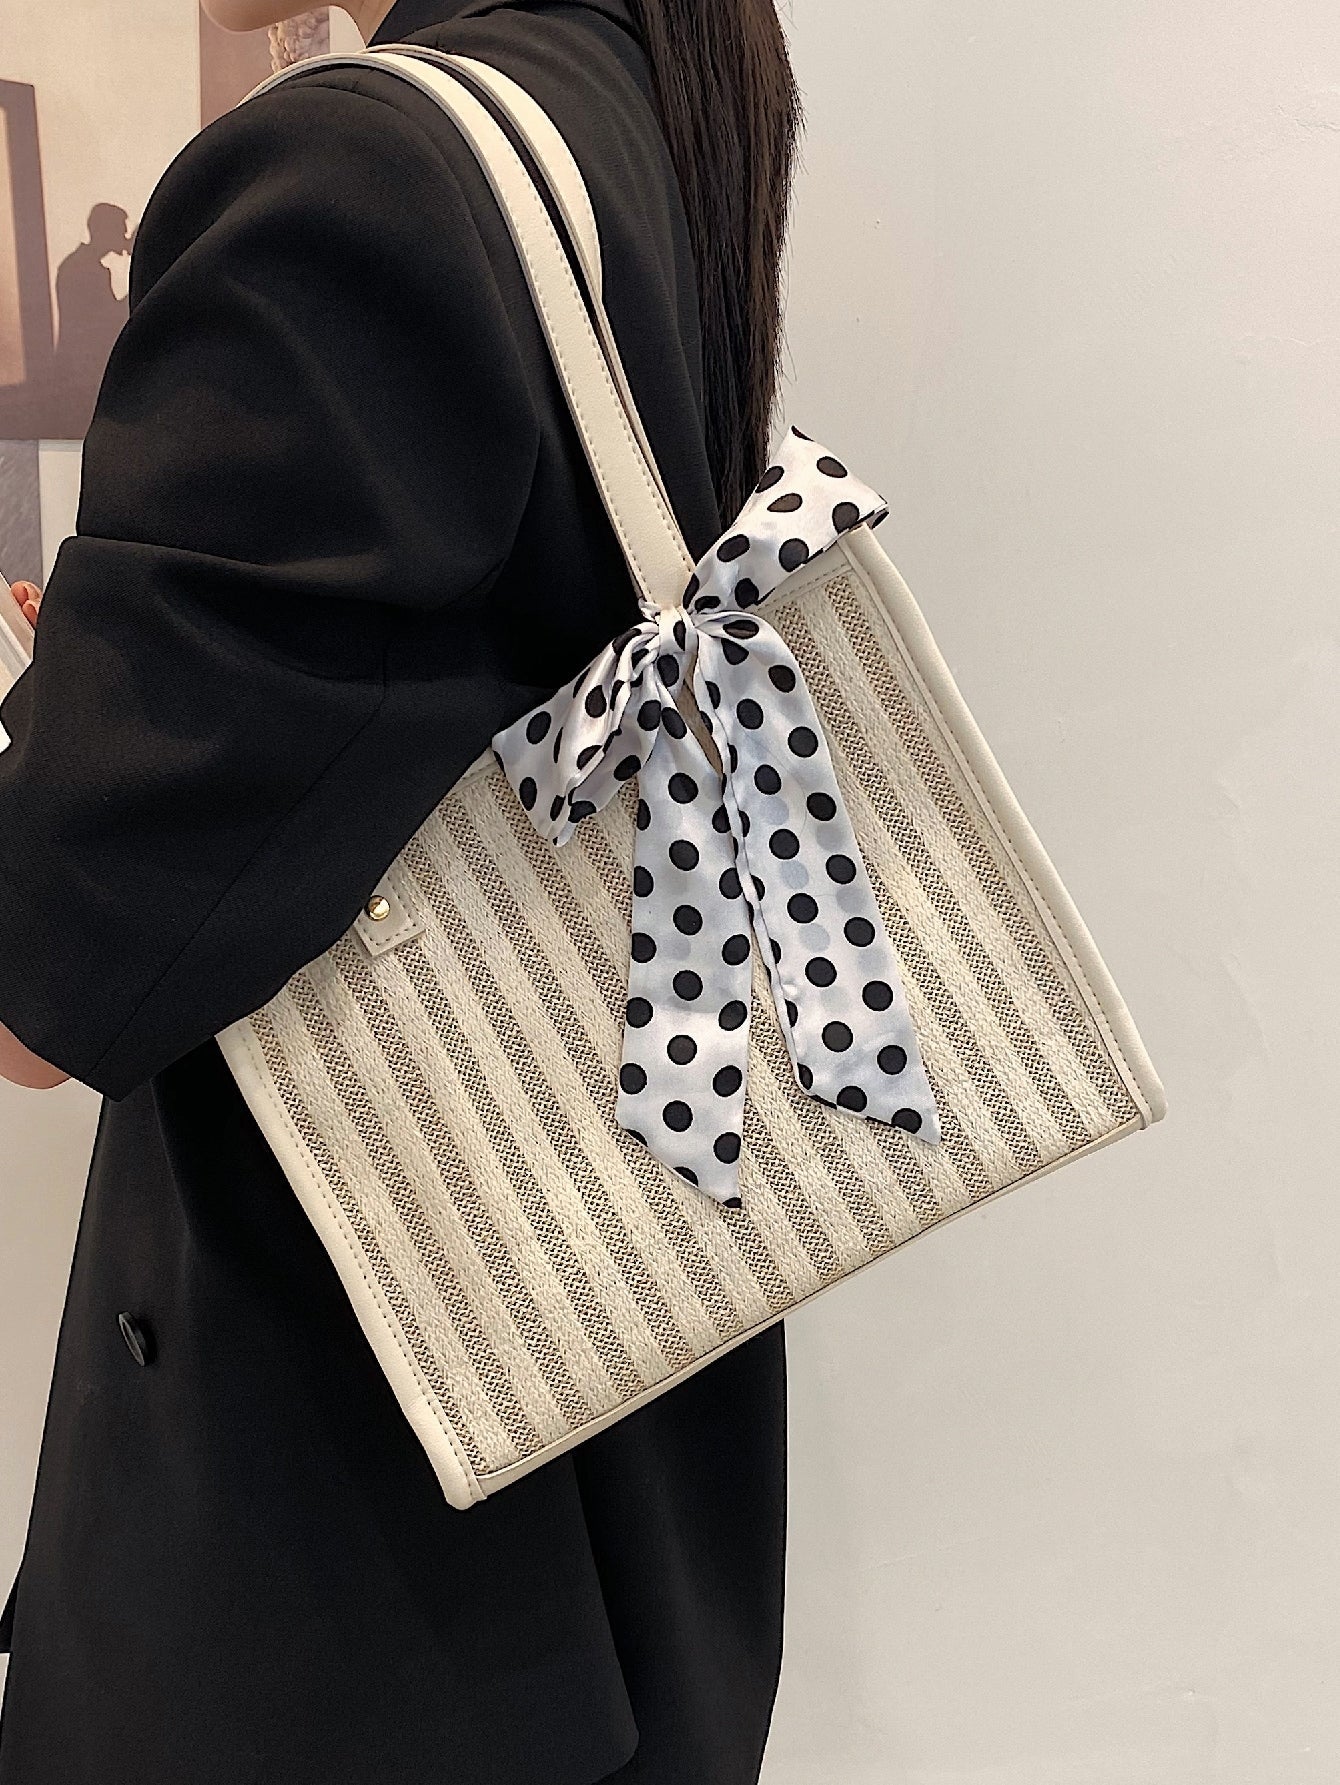 Twilly Scarf Decor Striped Tote Bag